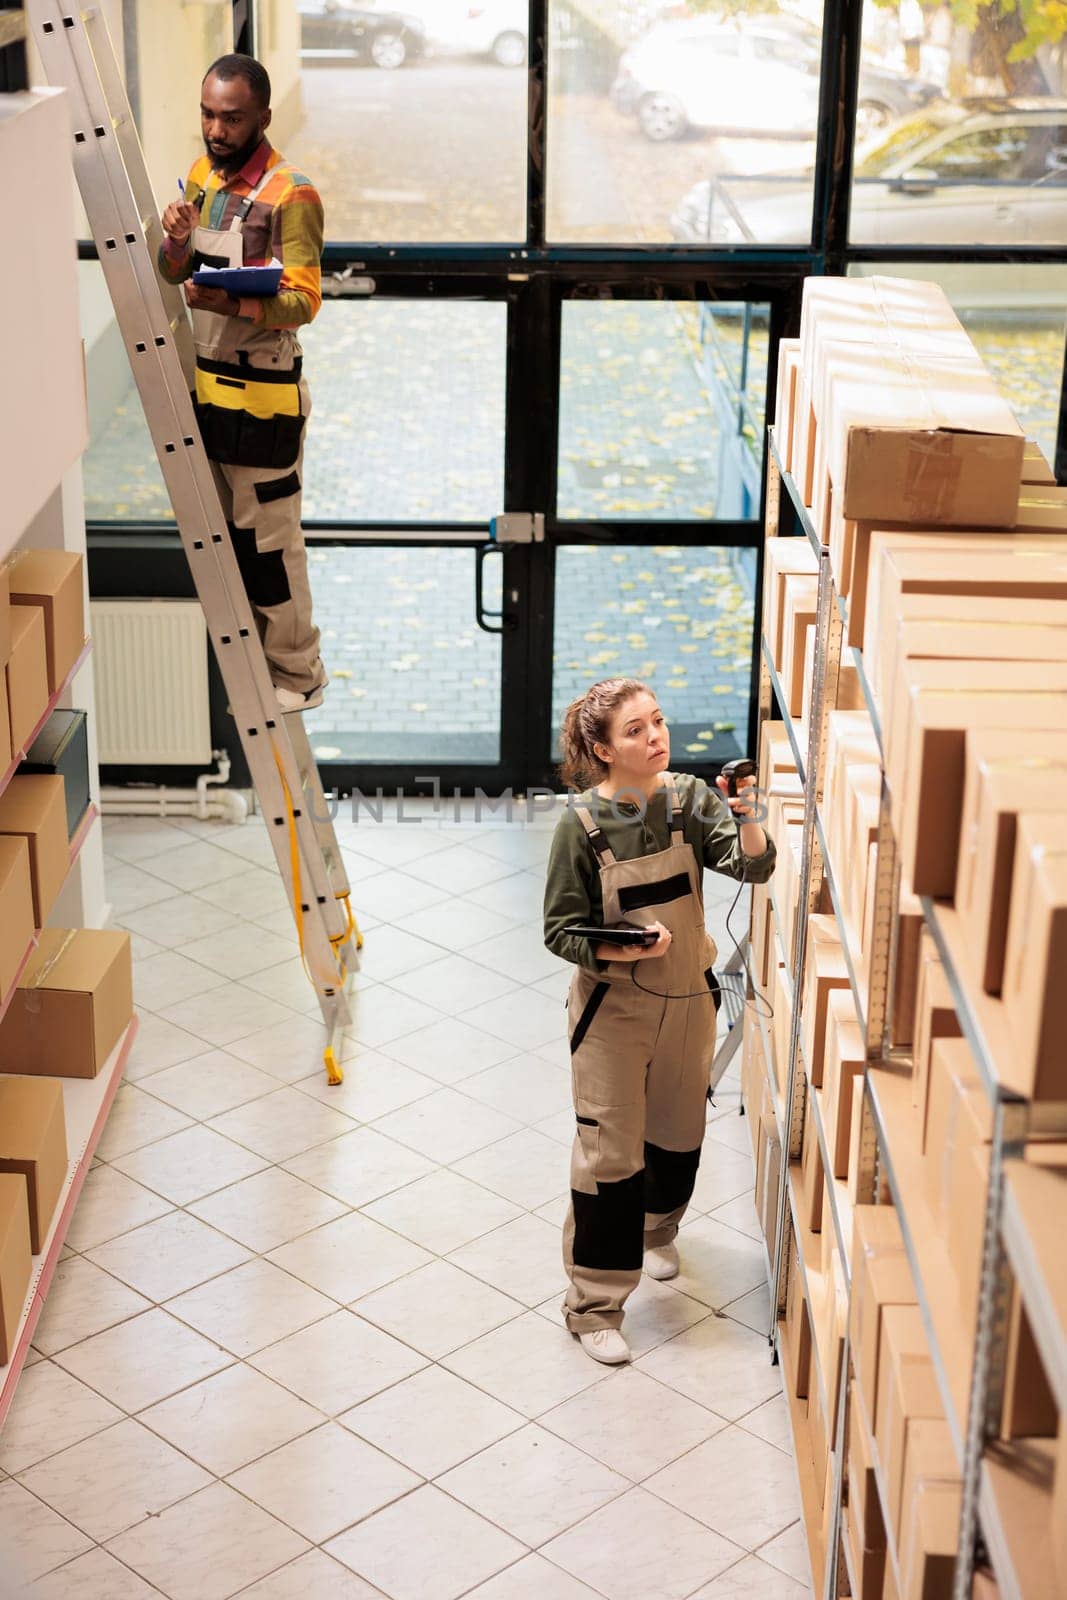 Stockroom employee scanning boxes using store scanner by DCStudio